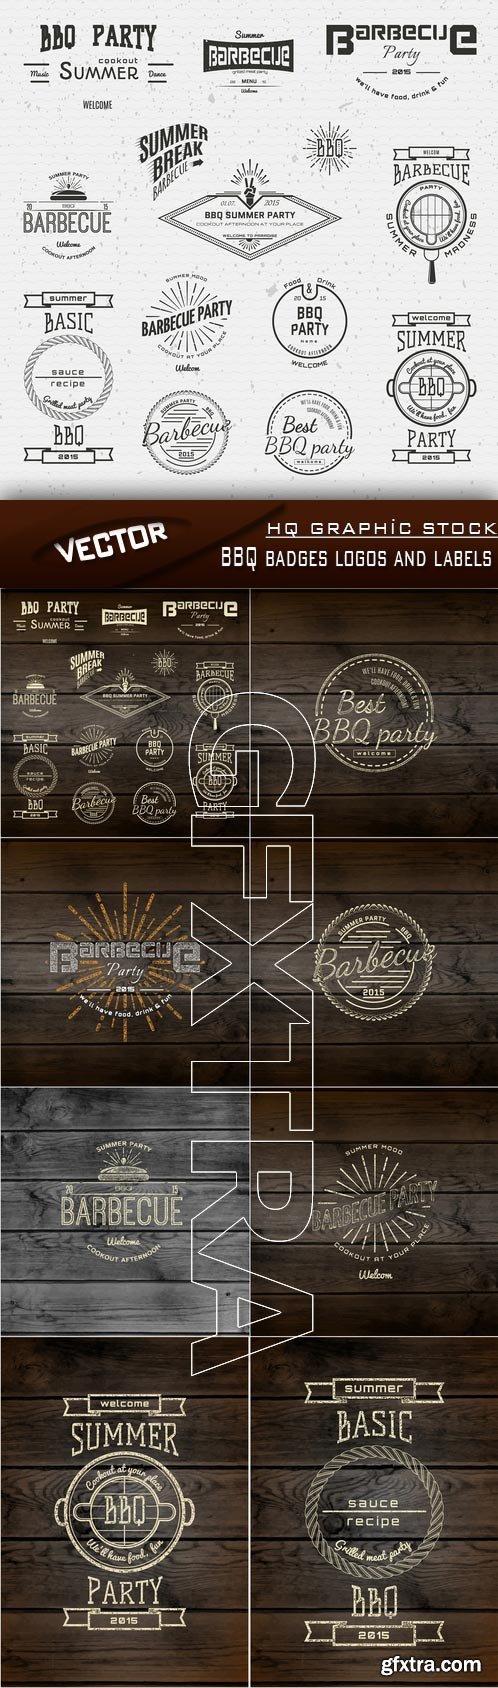 Stock Vector - BBQ badges logos and labels